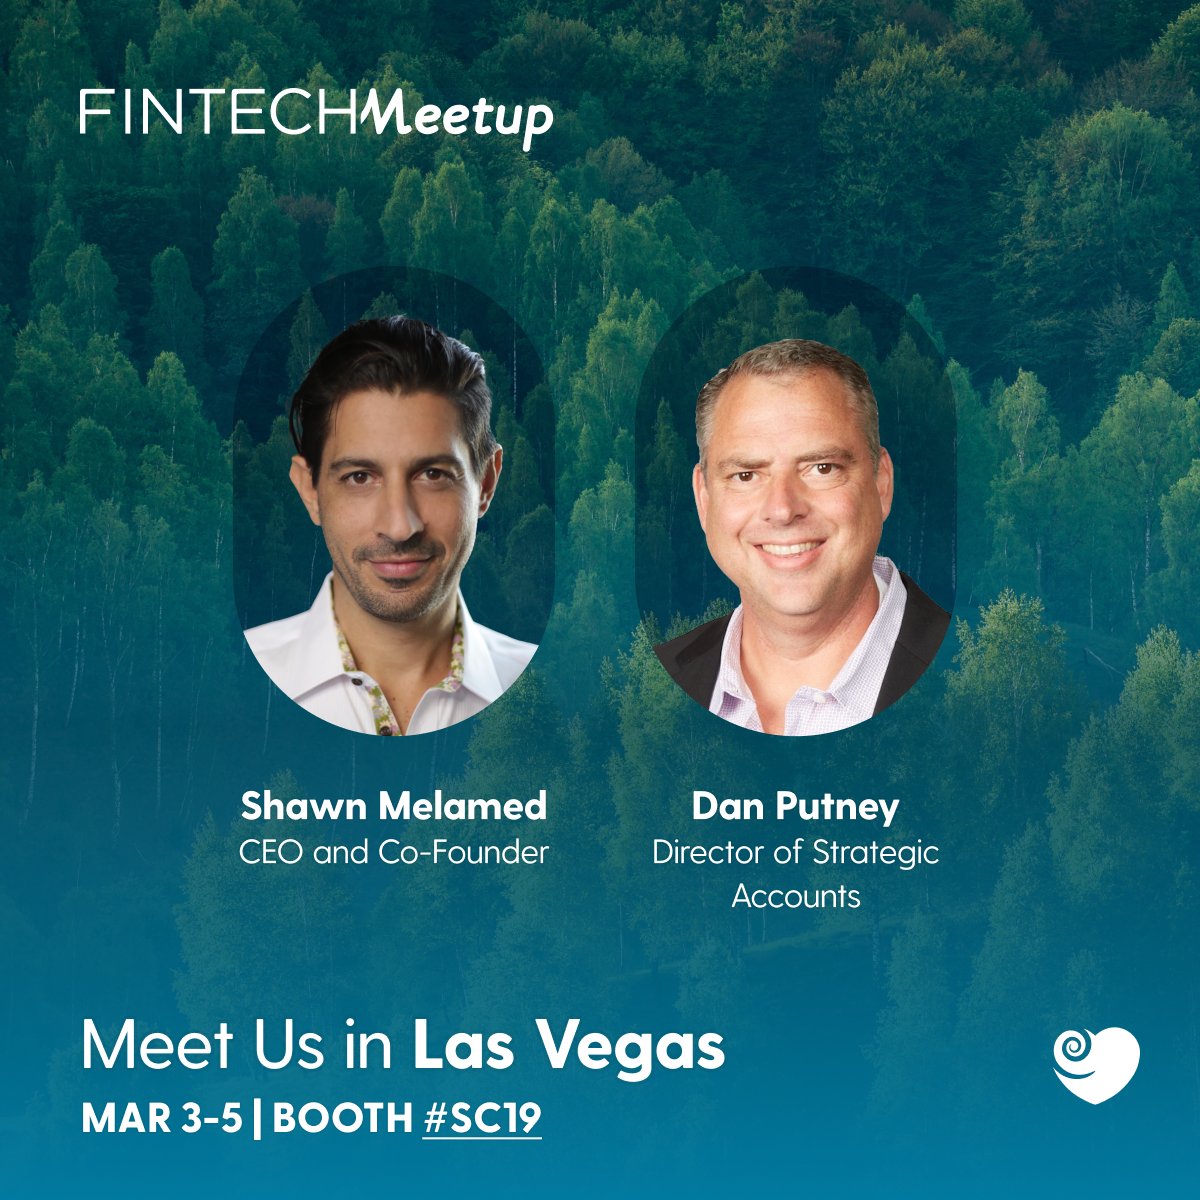 New booth alert! You’ll find us at the #FintechMeetup in Vegas at booth #SC19. We’re excited to share all the innovative ways we partner with banks and credit unions to boost deposits, attract new accounts, and create a better world. Let's connect! 👉️ bit.ly/fintechmeetup24